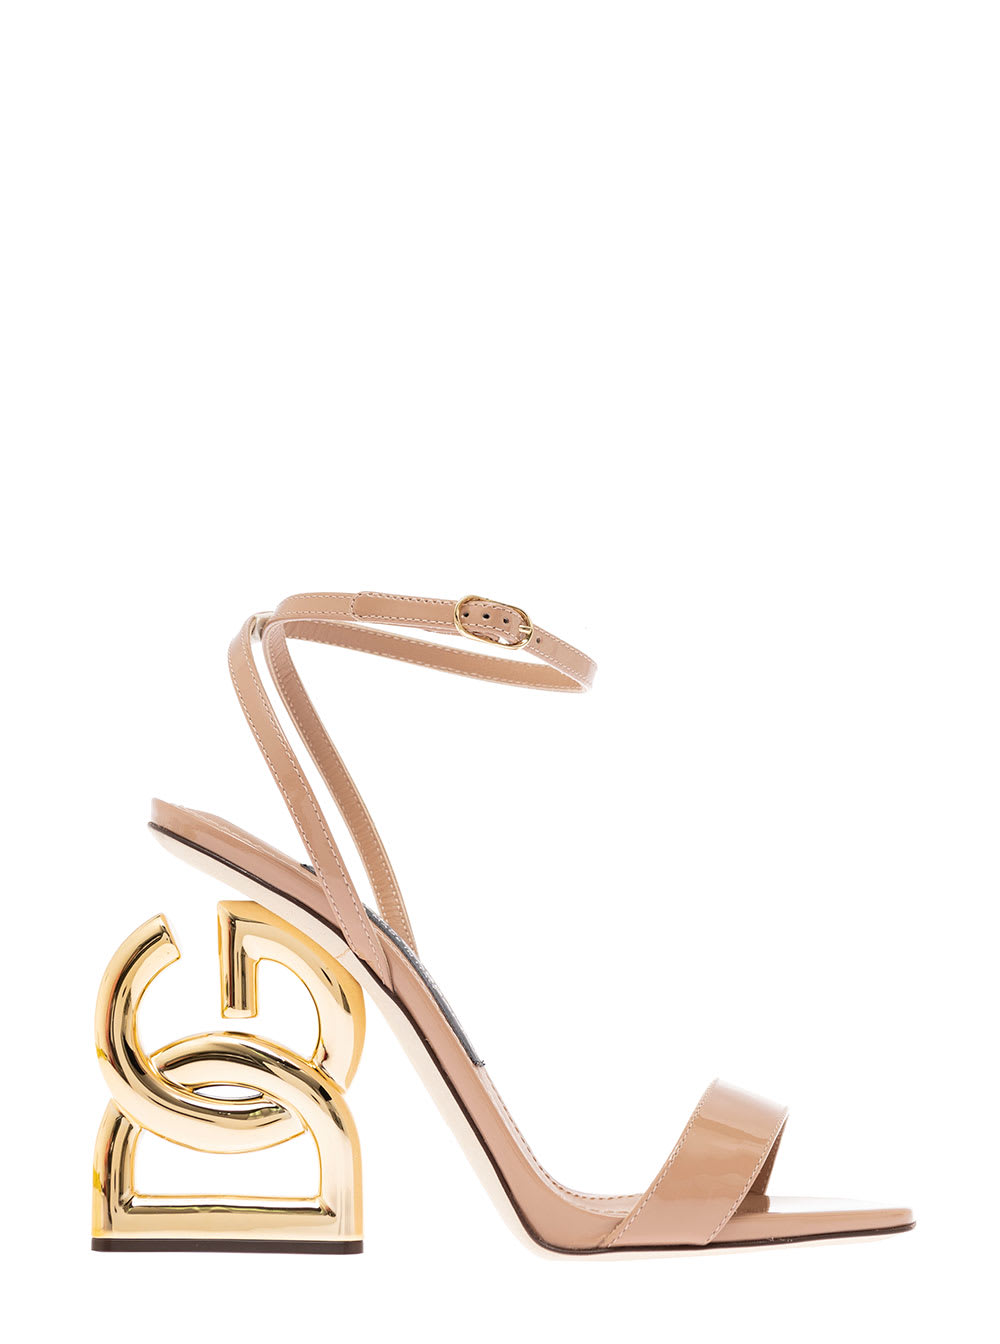 Dolce & Gabbana Womans Keira Powder Pink Leather Sandals